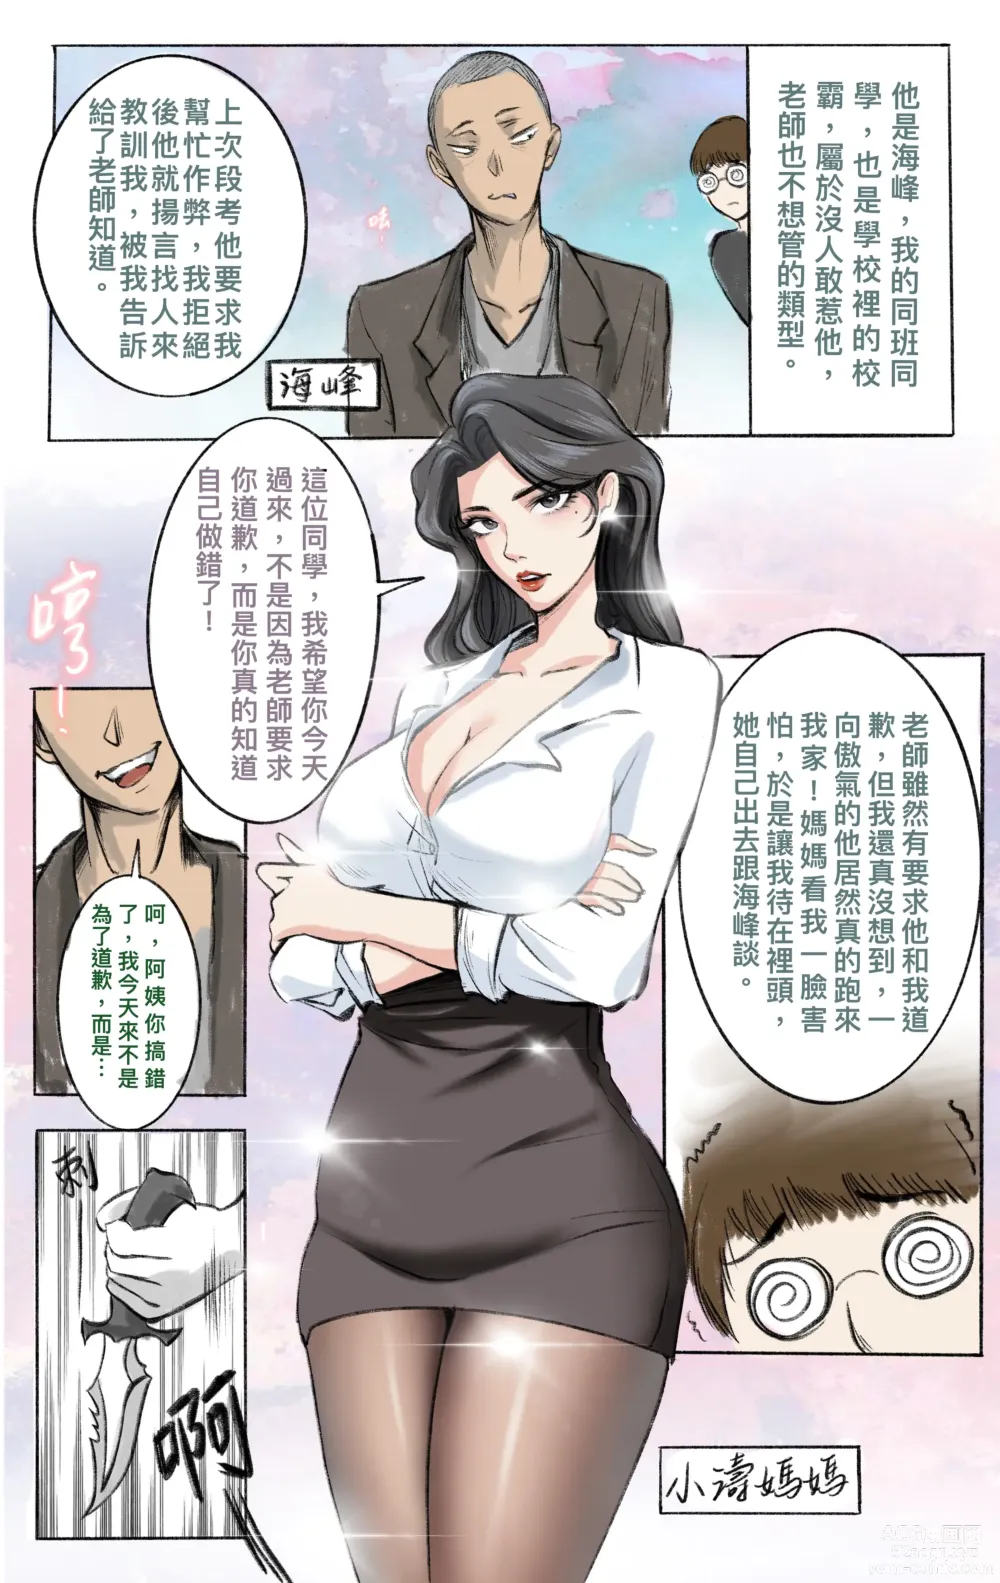 Page 1 of doujinshi 母愛之下